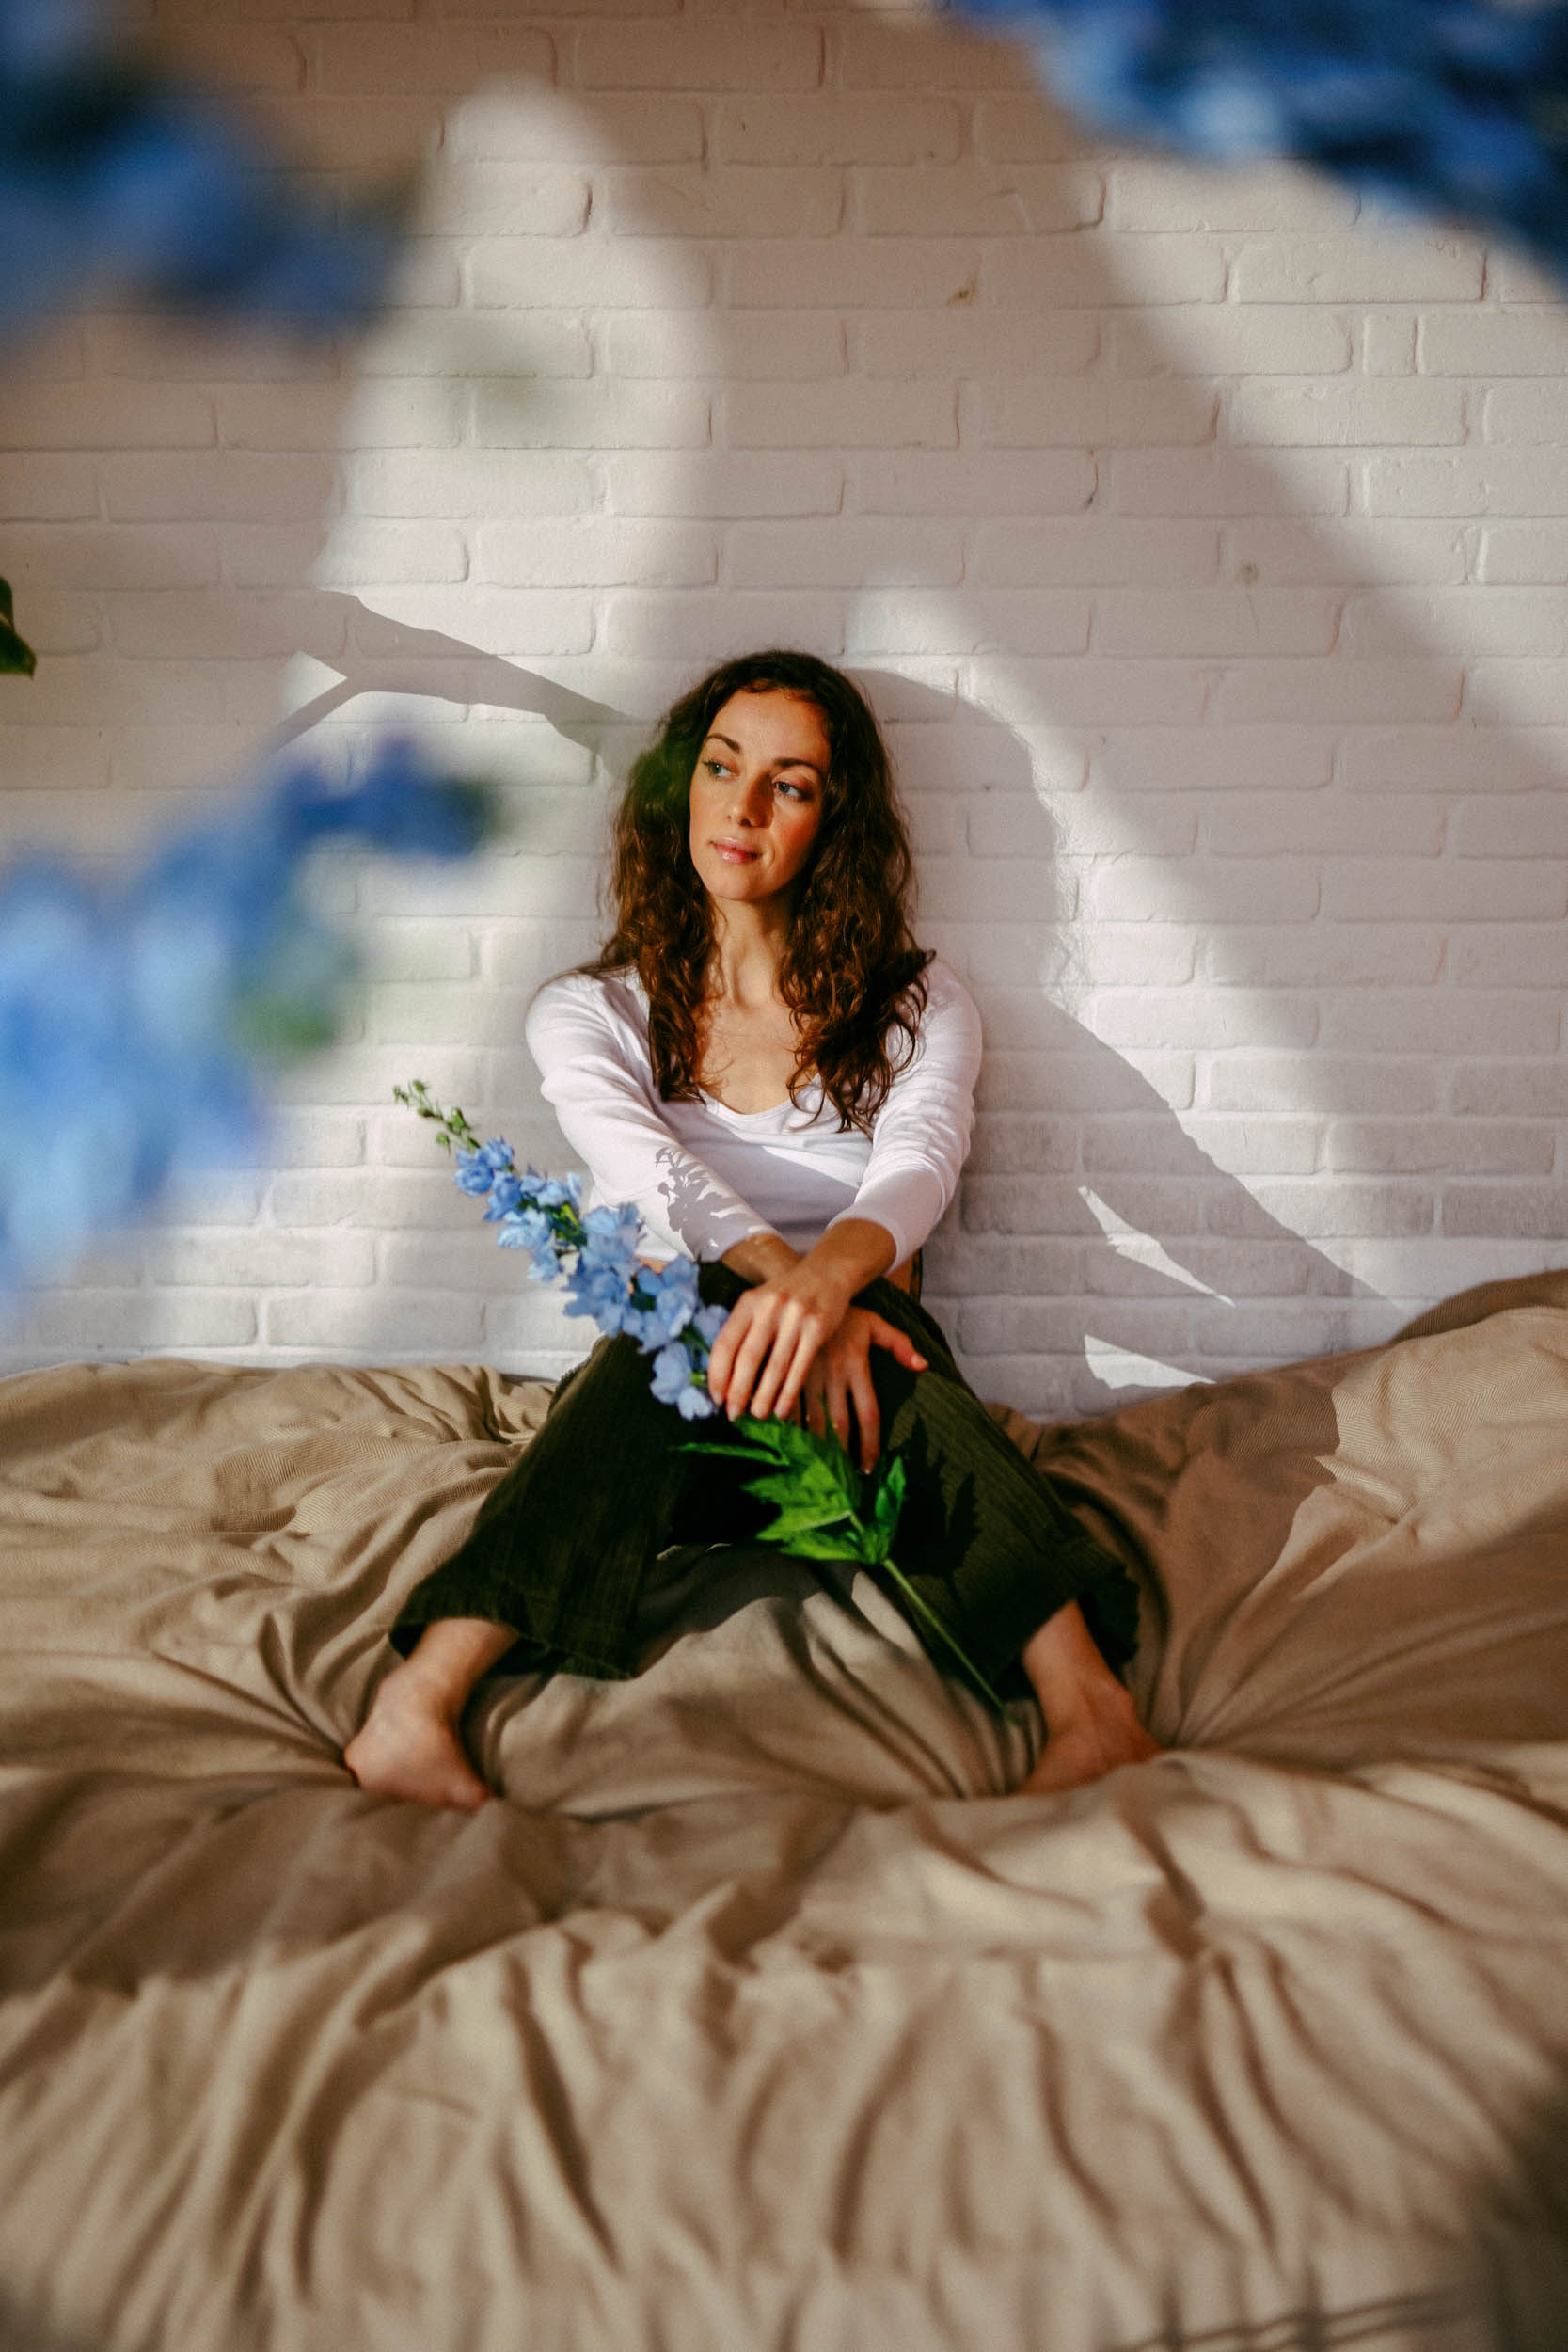 A woman sitting on a bed of blue flowers.